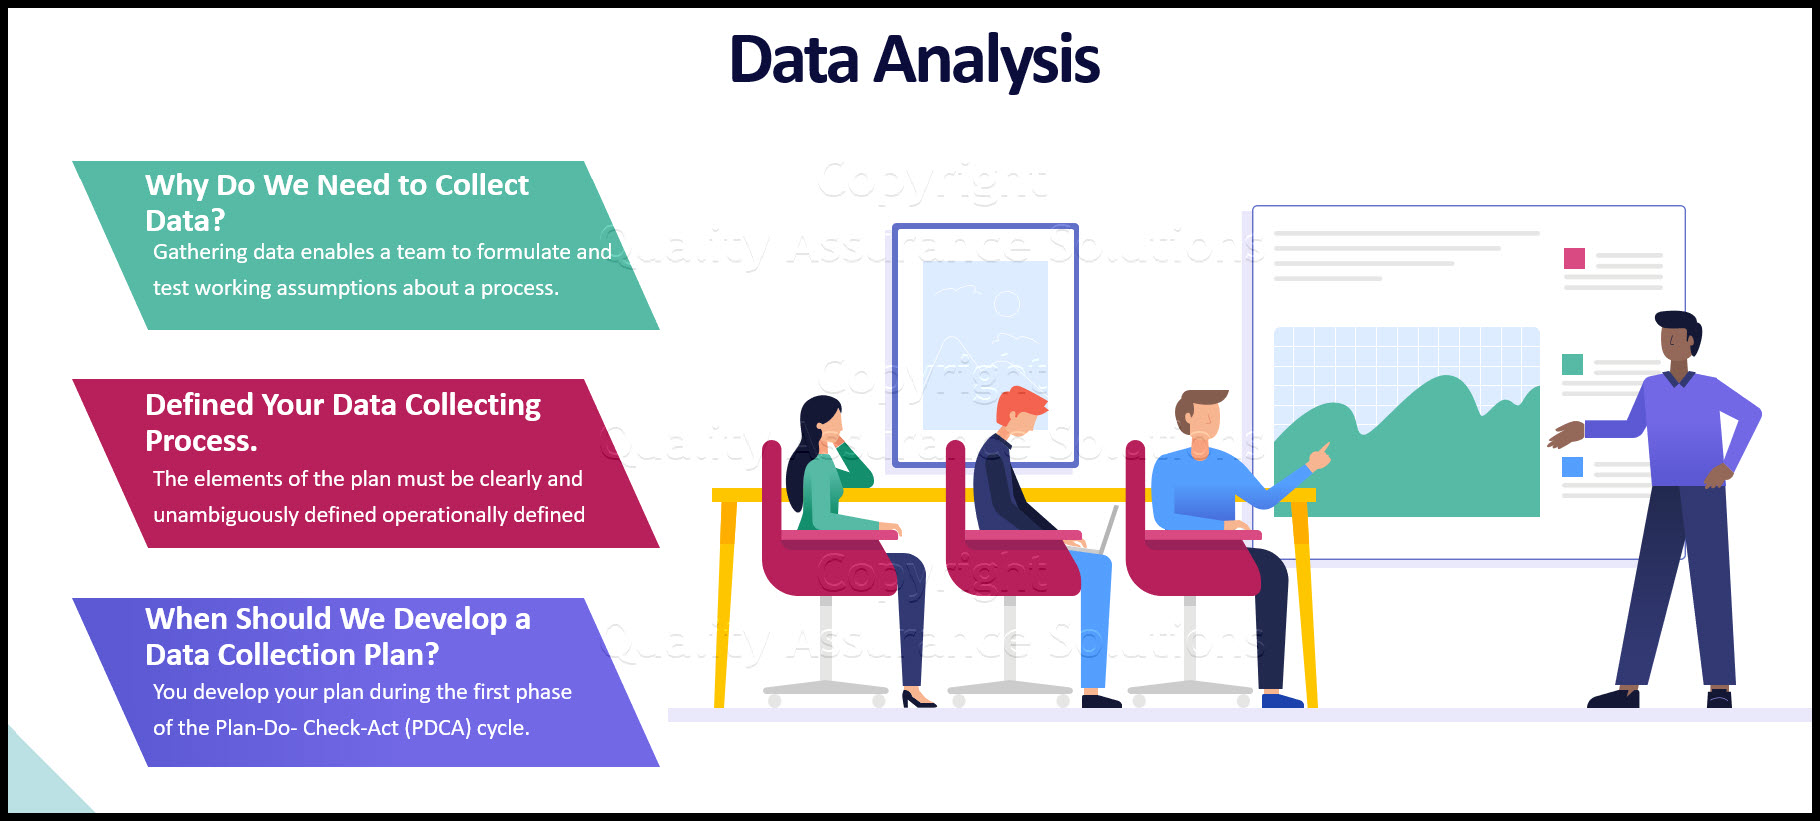 When you understand data analysis techniques, you take a big step towards making product and process improvements.